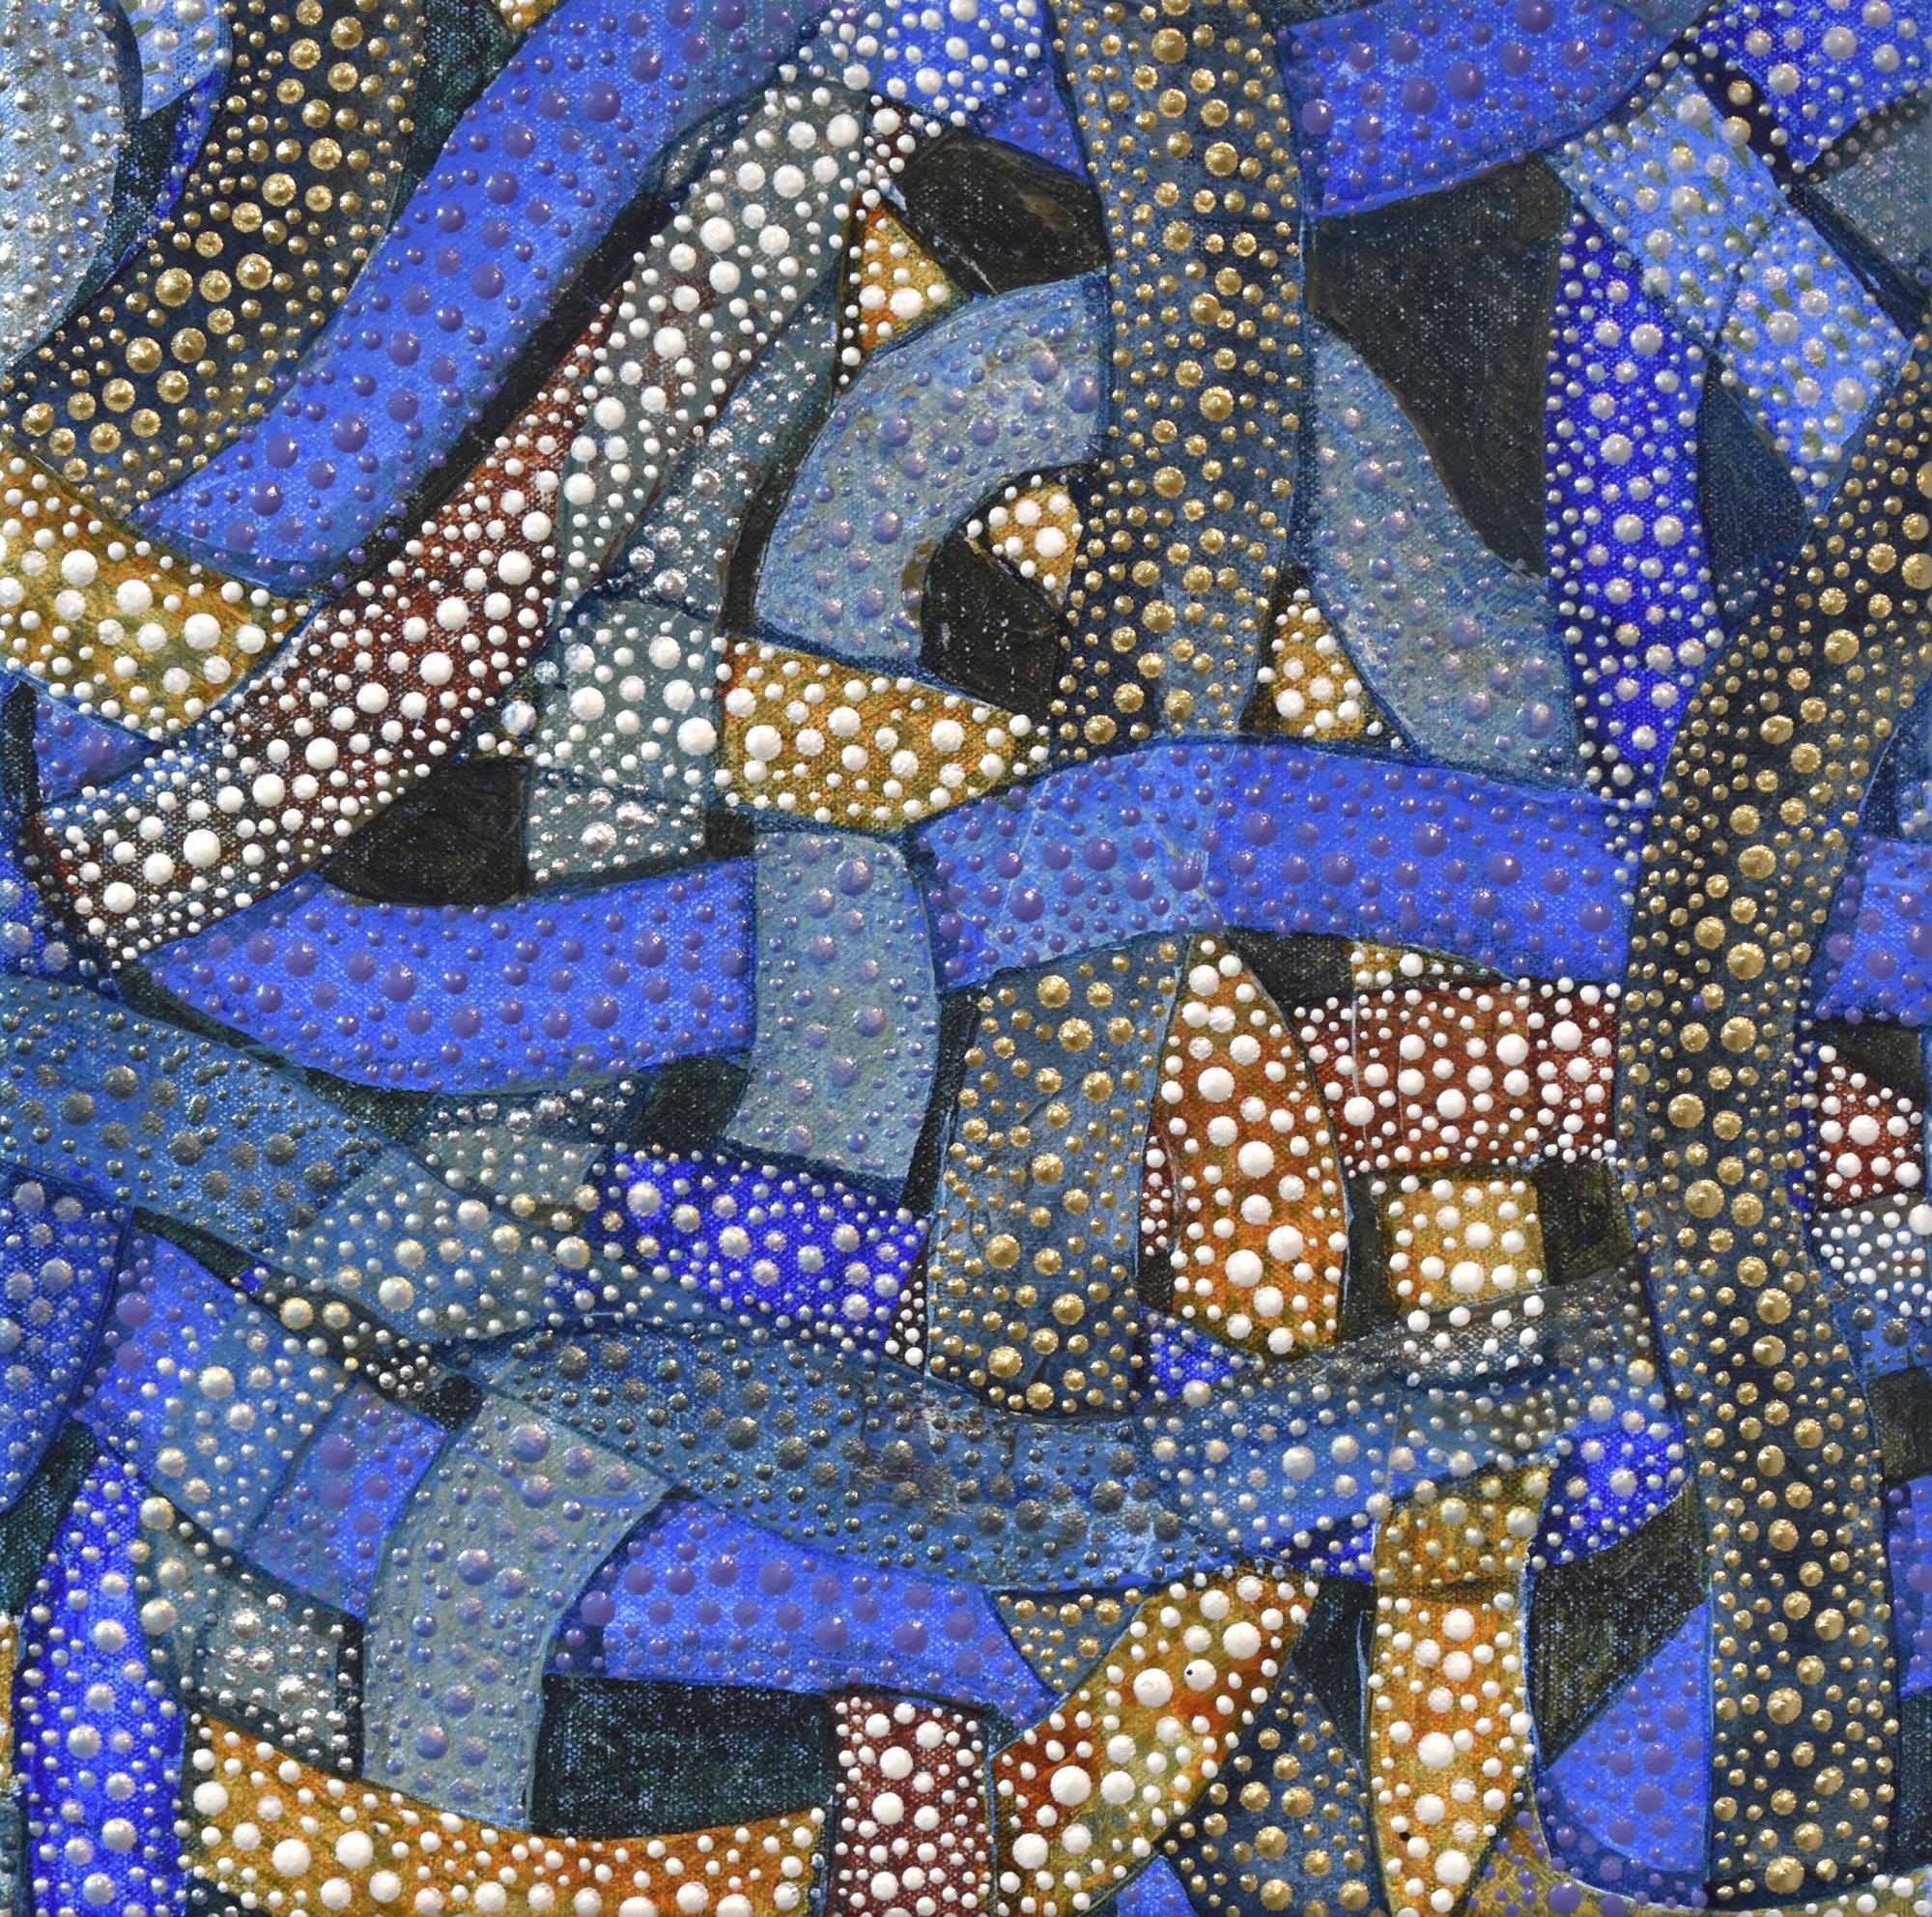 Denise Driscoll Abstract Painting - "Tangle 3", abstract, blue, earthy orange, dots, gold, silver, acrylic painting